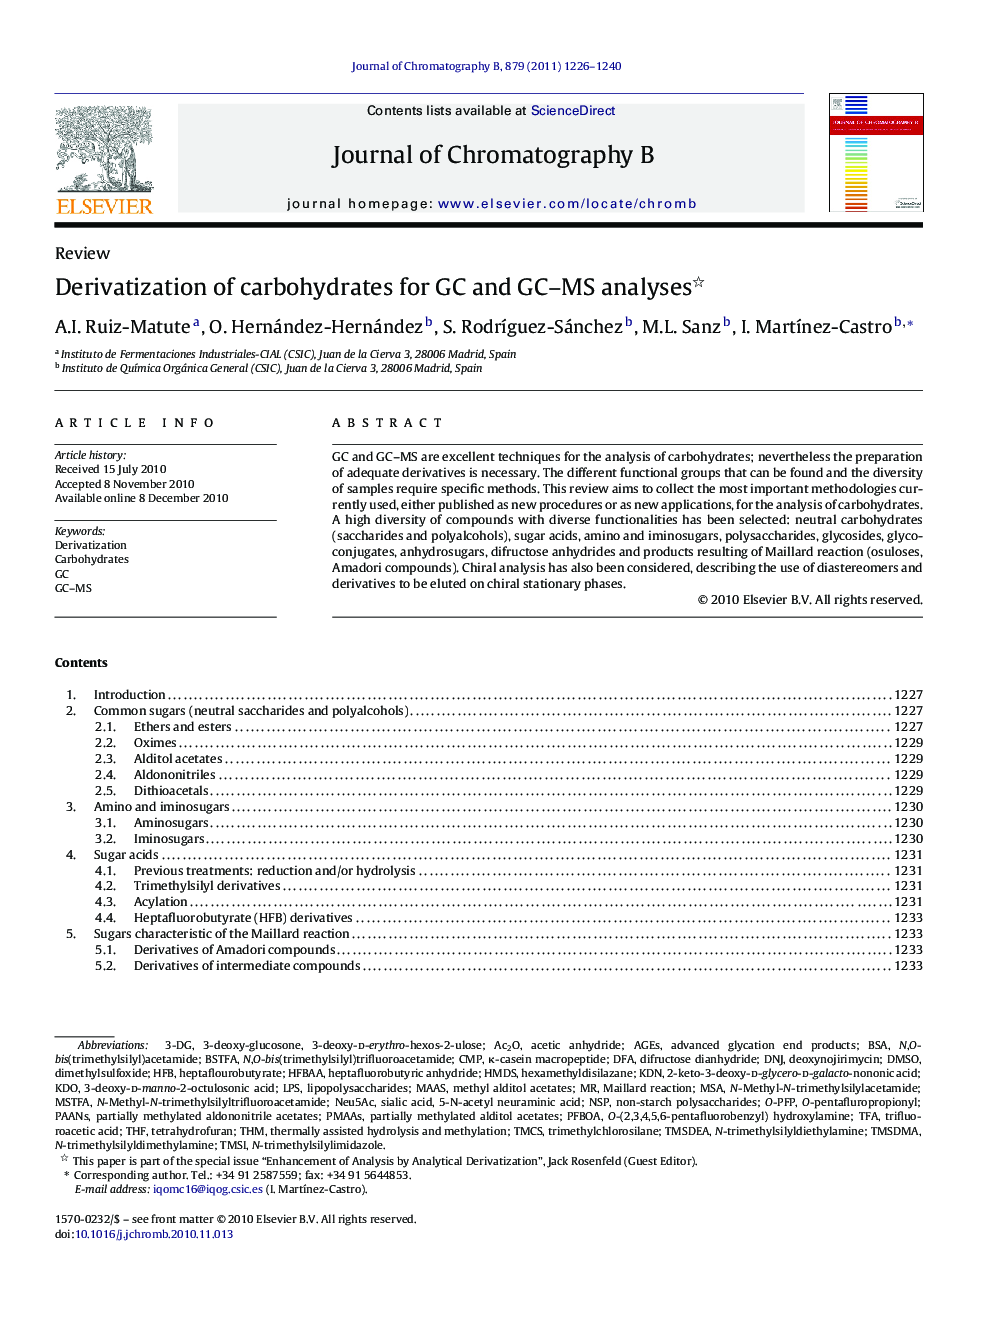 Derivatization of carbohydrates for GC and GC–MS analyses 